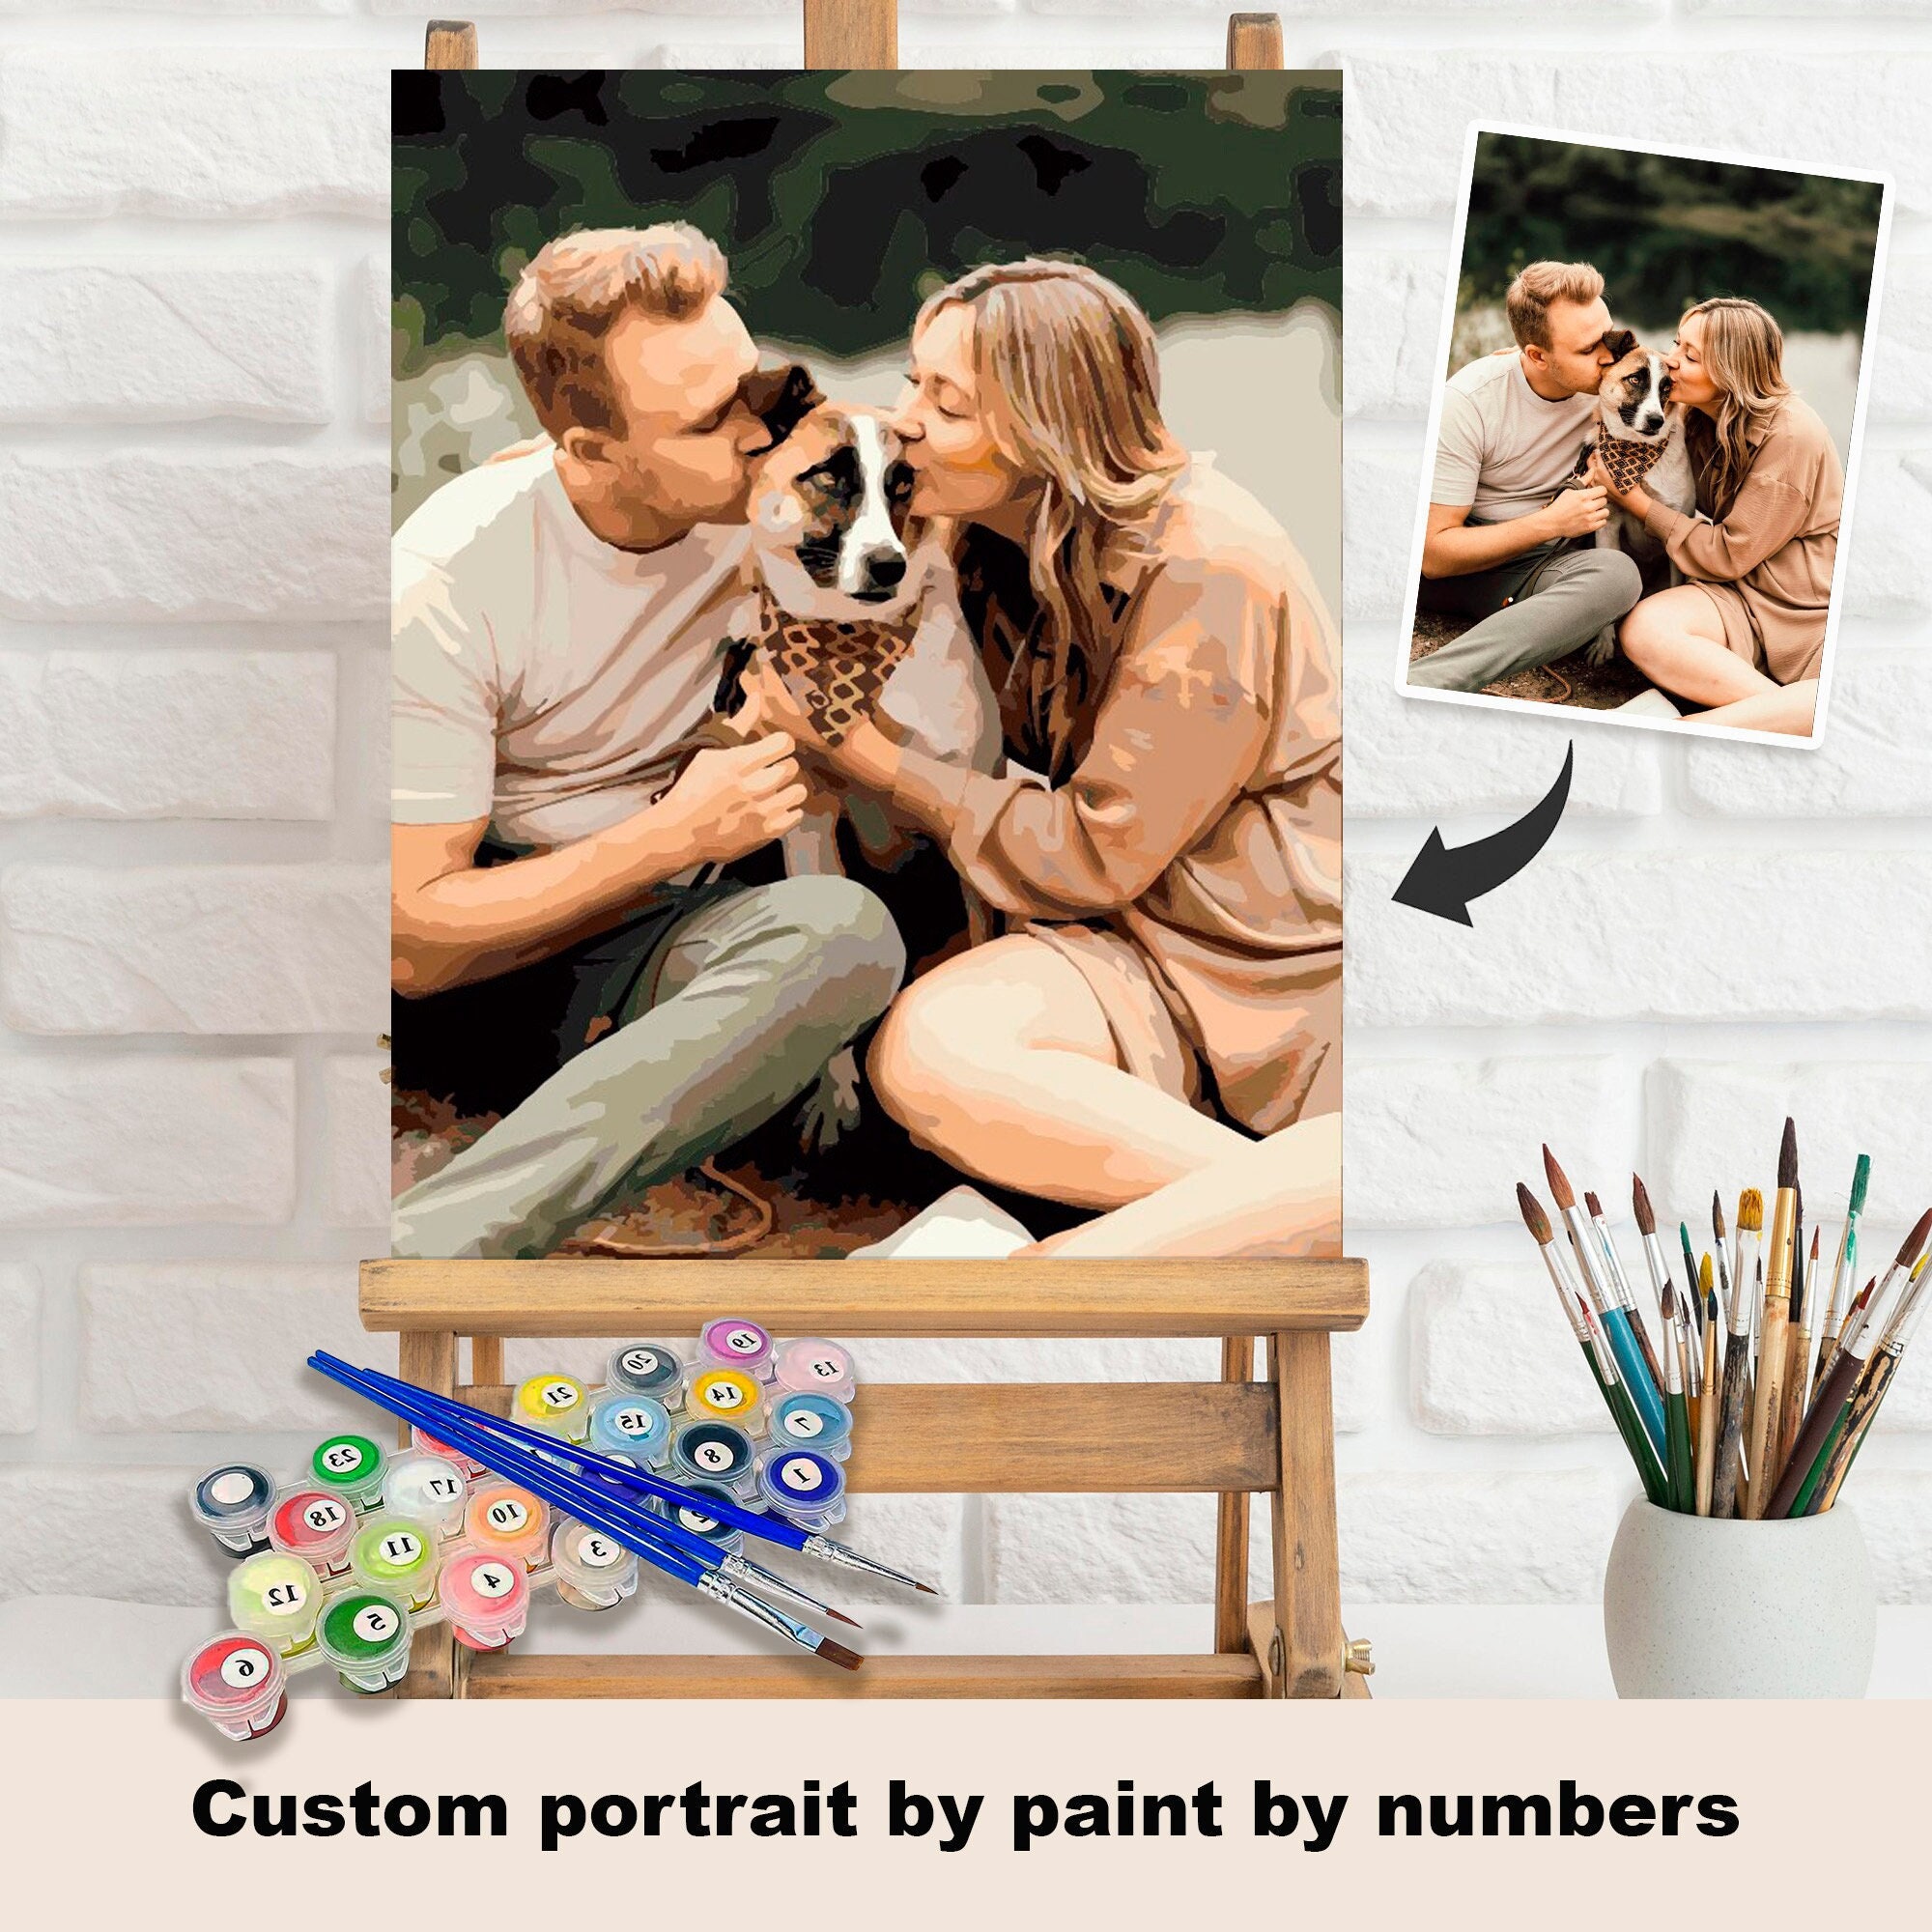 moorcowry Personalized Painting, Customized Paint by Numbers Kit for Adults  Beginners Make Your Own Private Picture Digital Paintings Gifts for Home